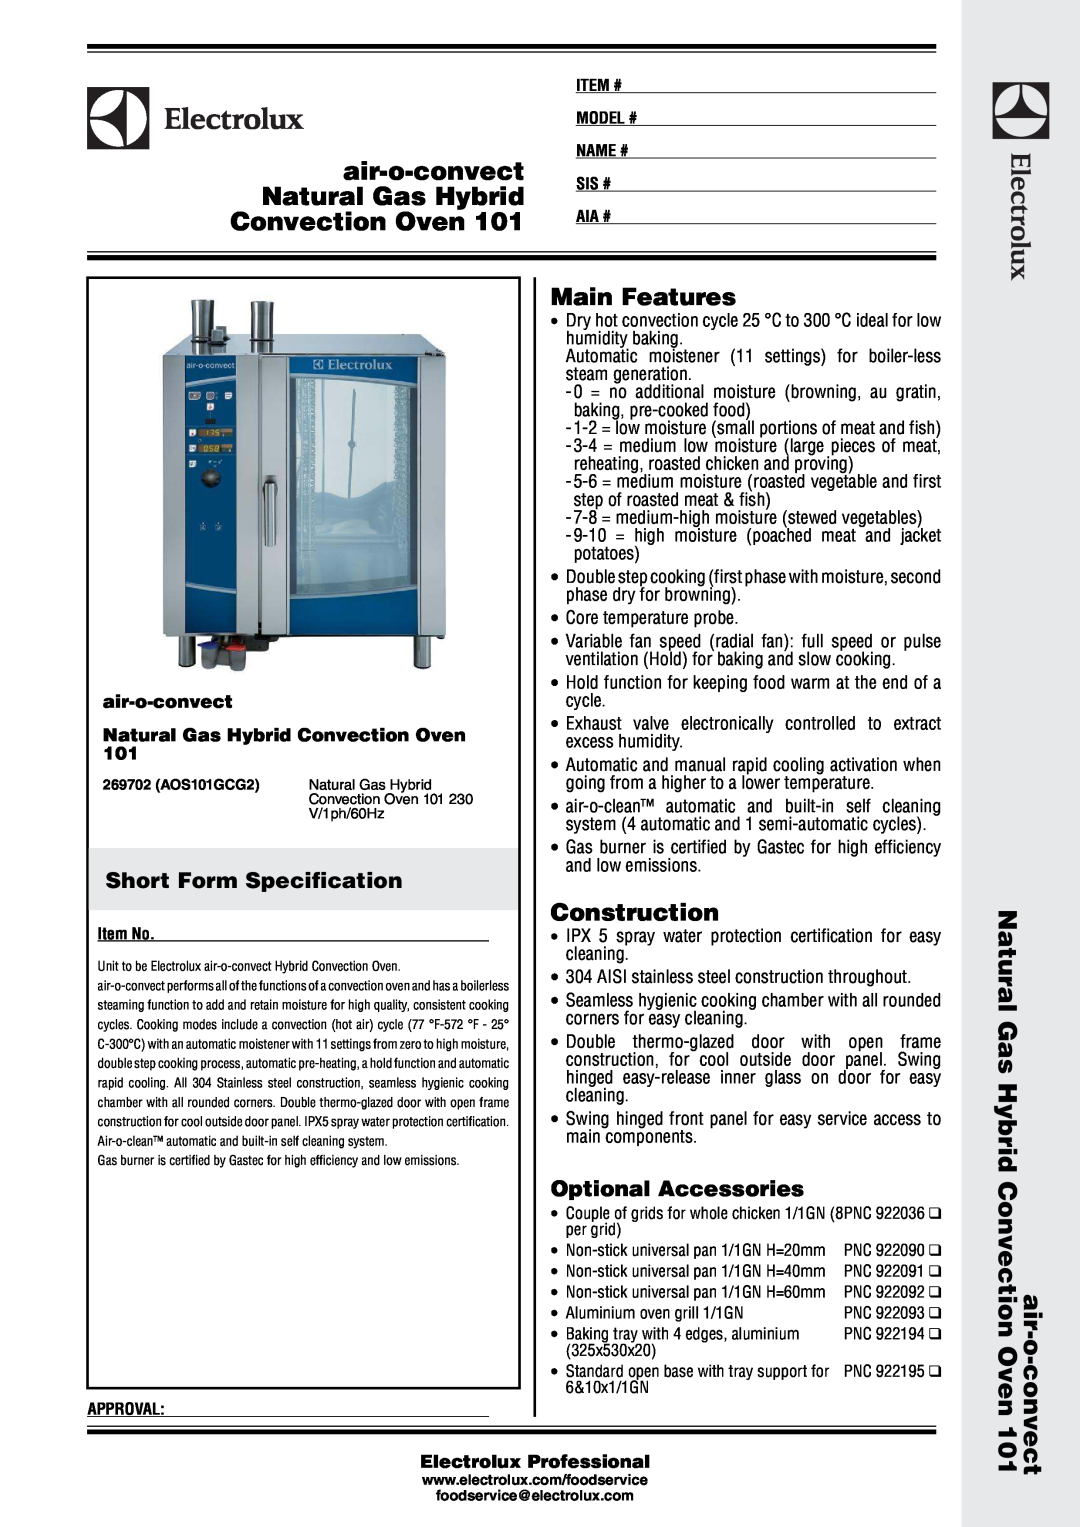 Electrolux 101 manual air-o-convect Natural Gas Hybrid Convection Oven, Short Form Specification, Construction 